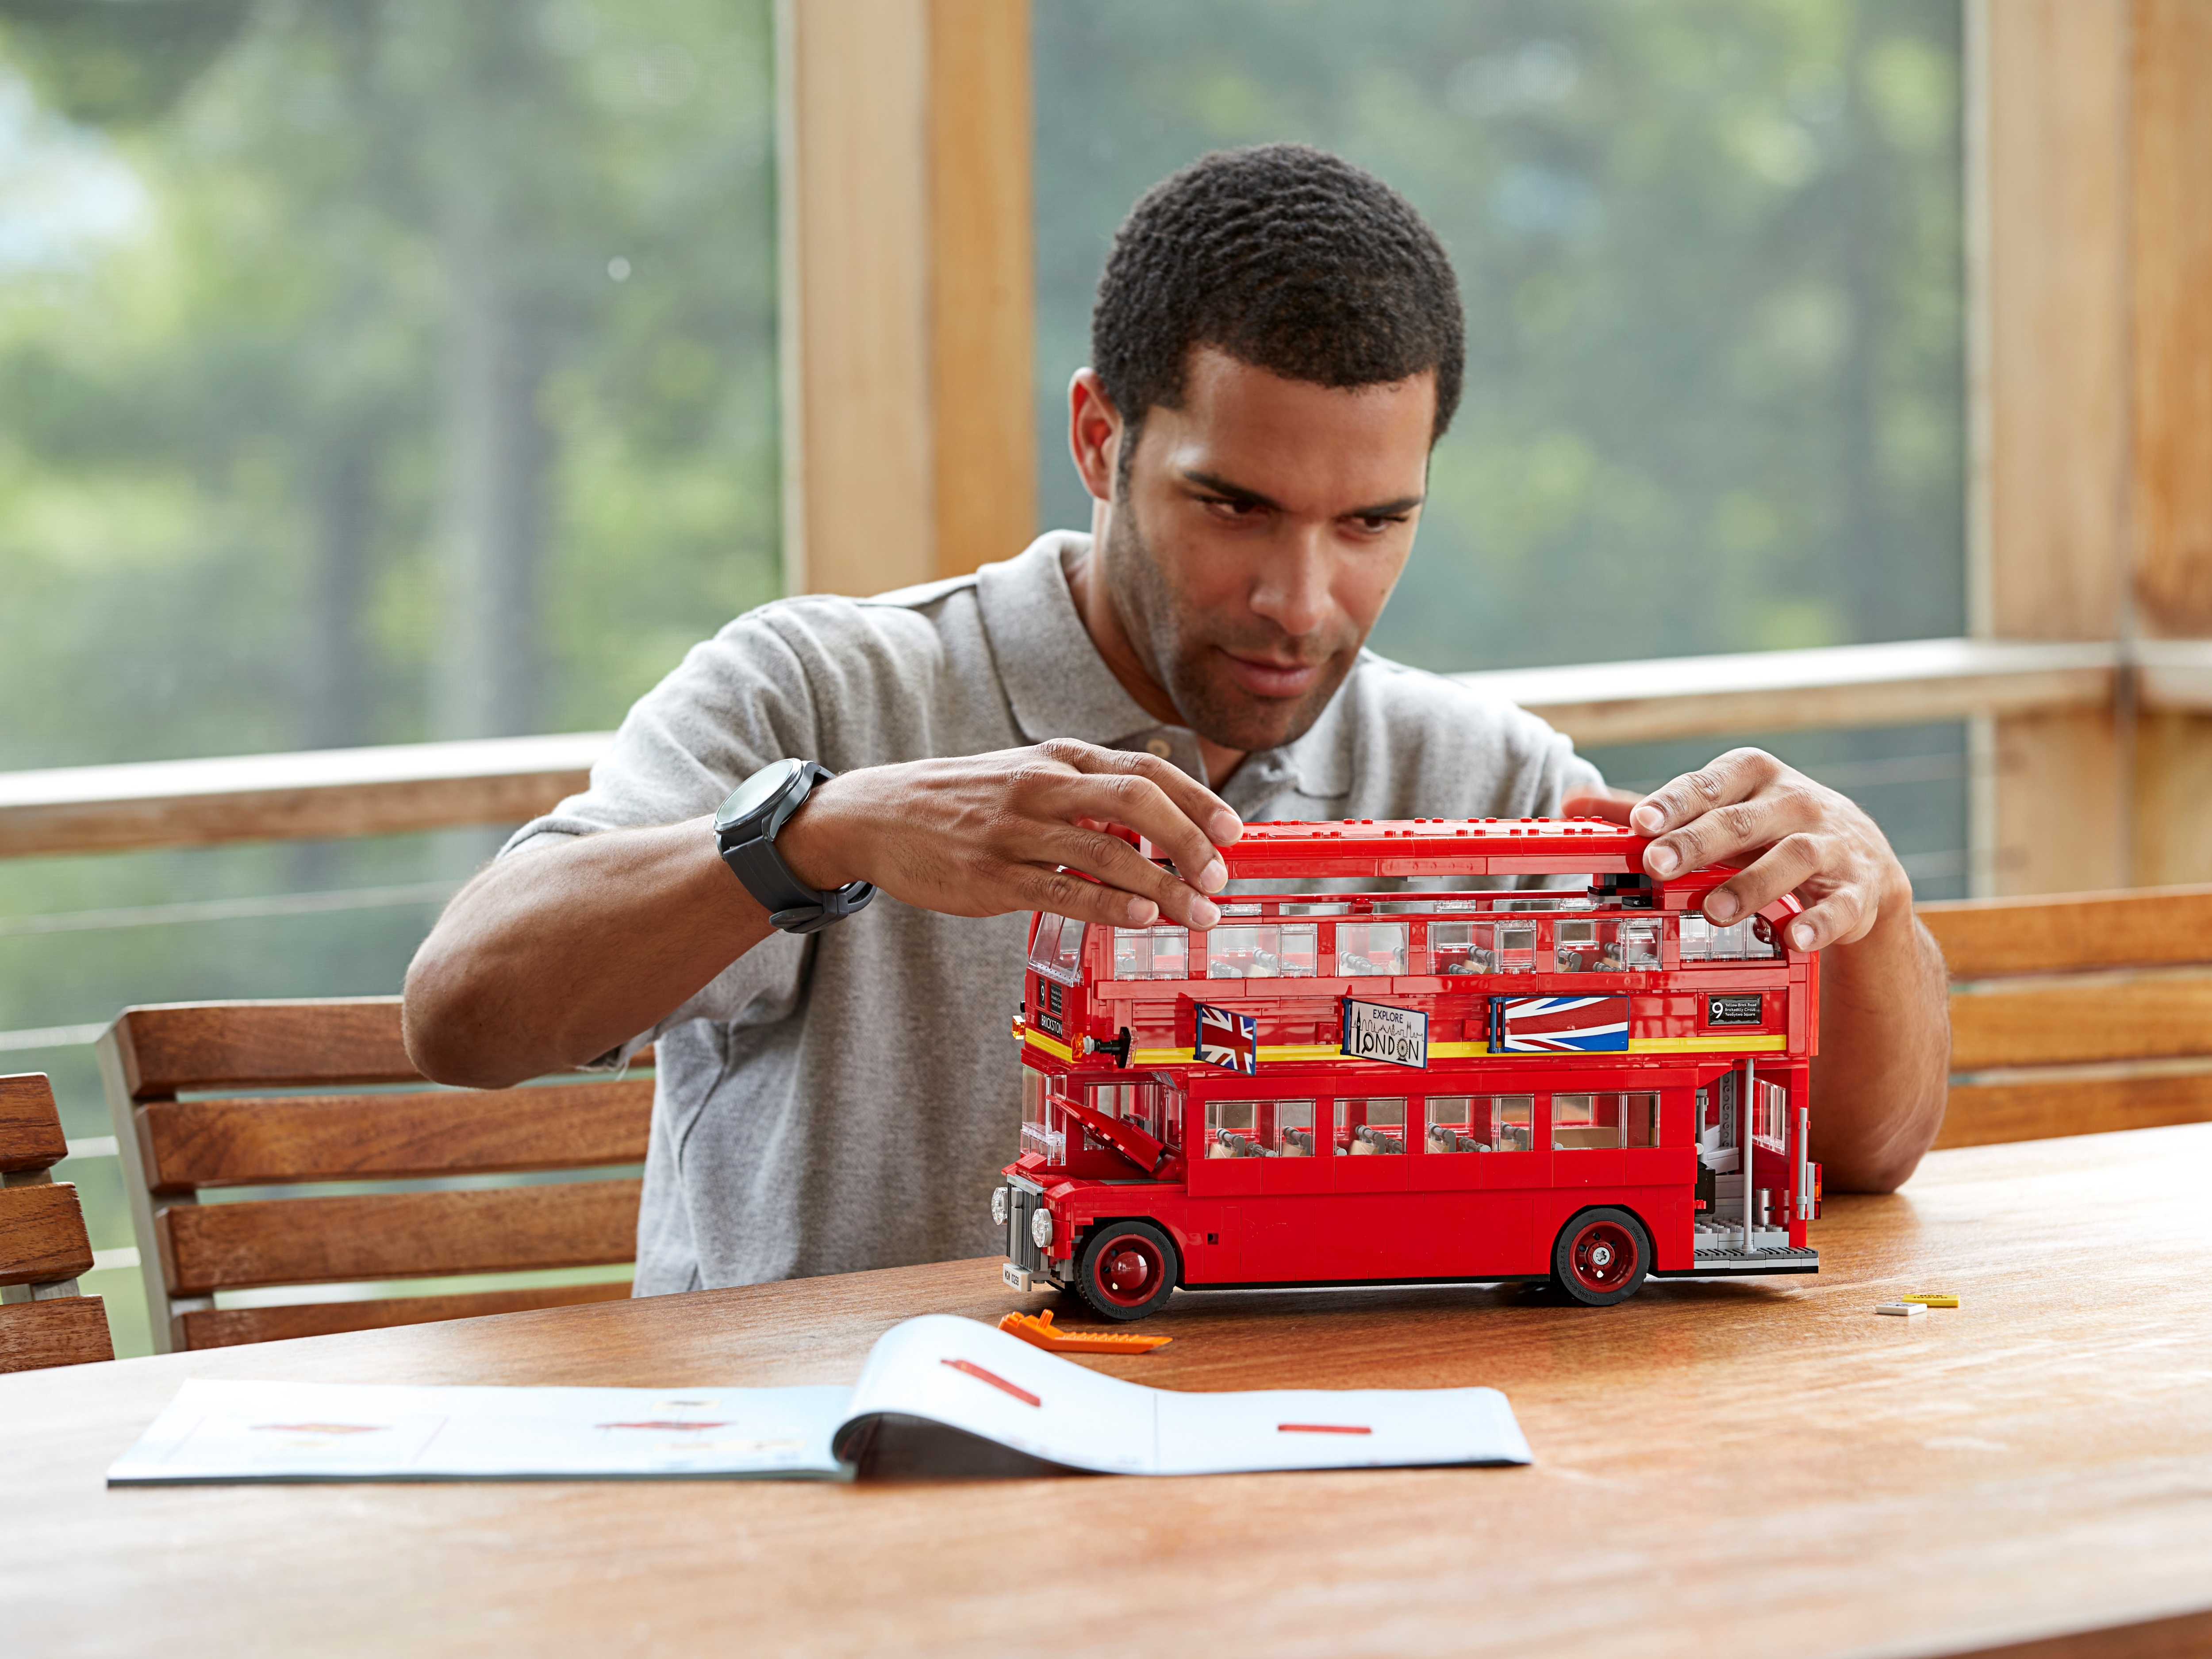 London Bus 10258 | Creator | Buy at the Official LEGO® Shop US